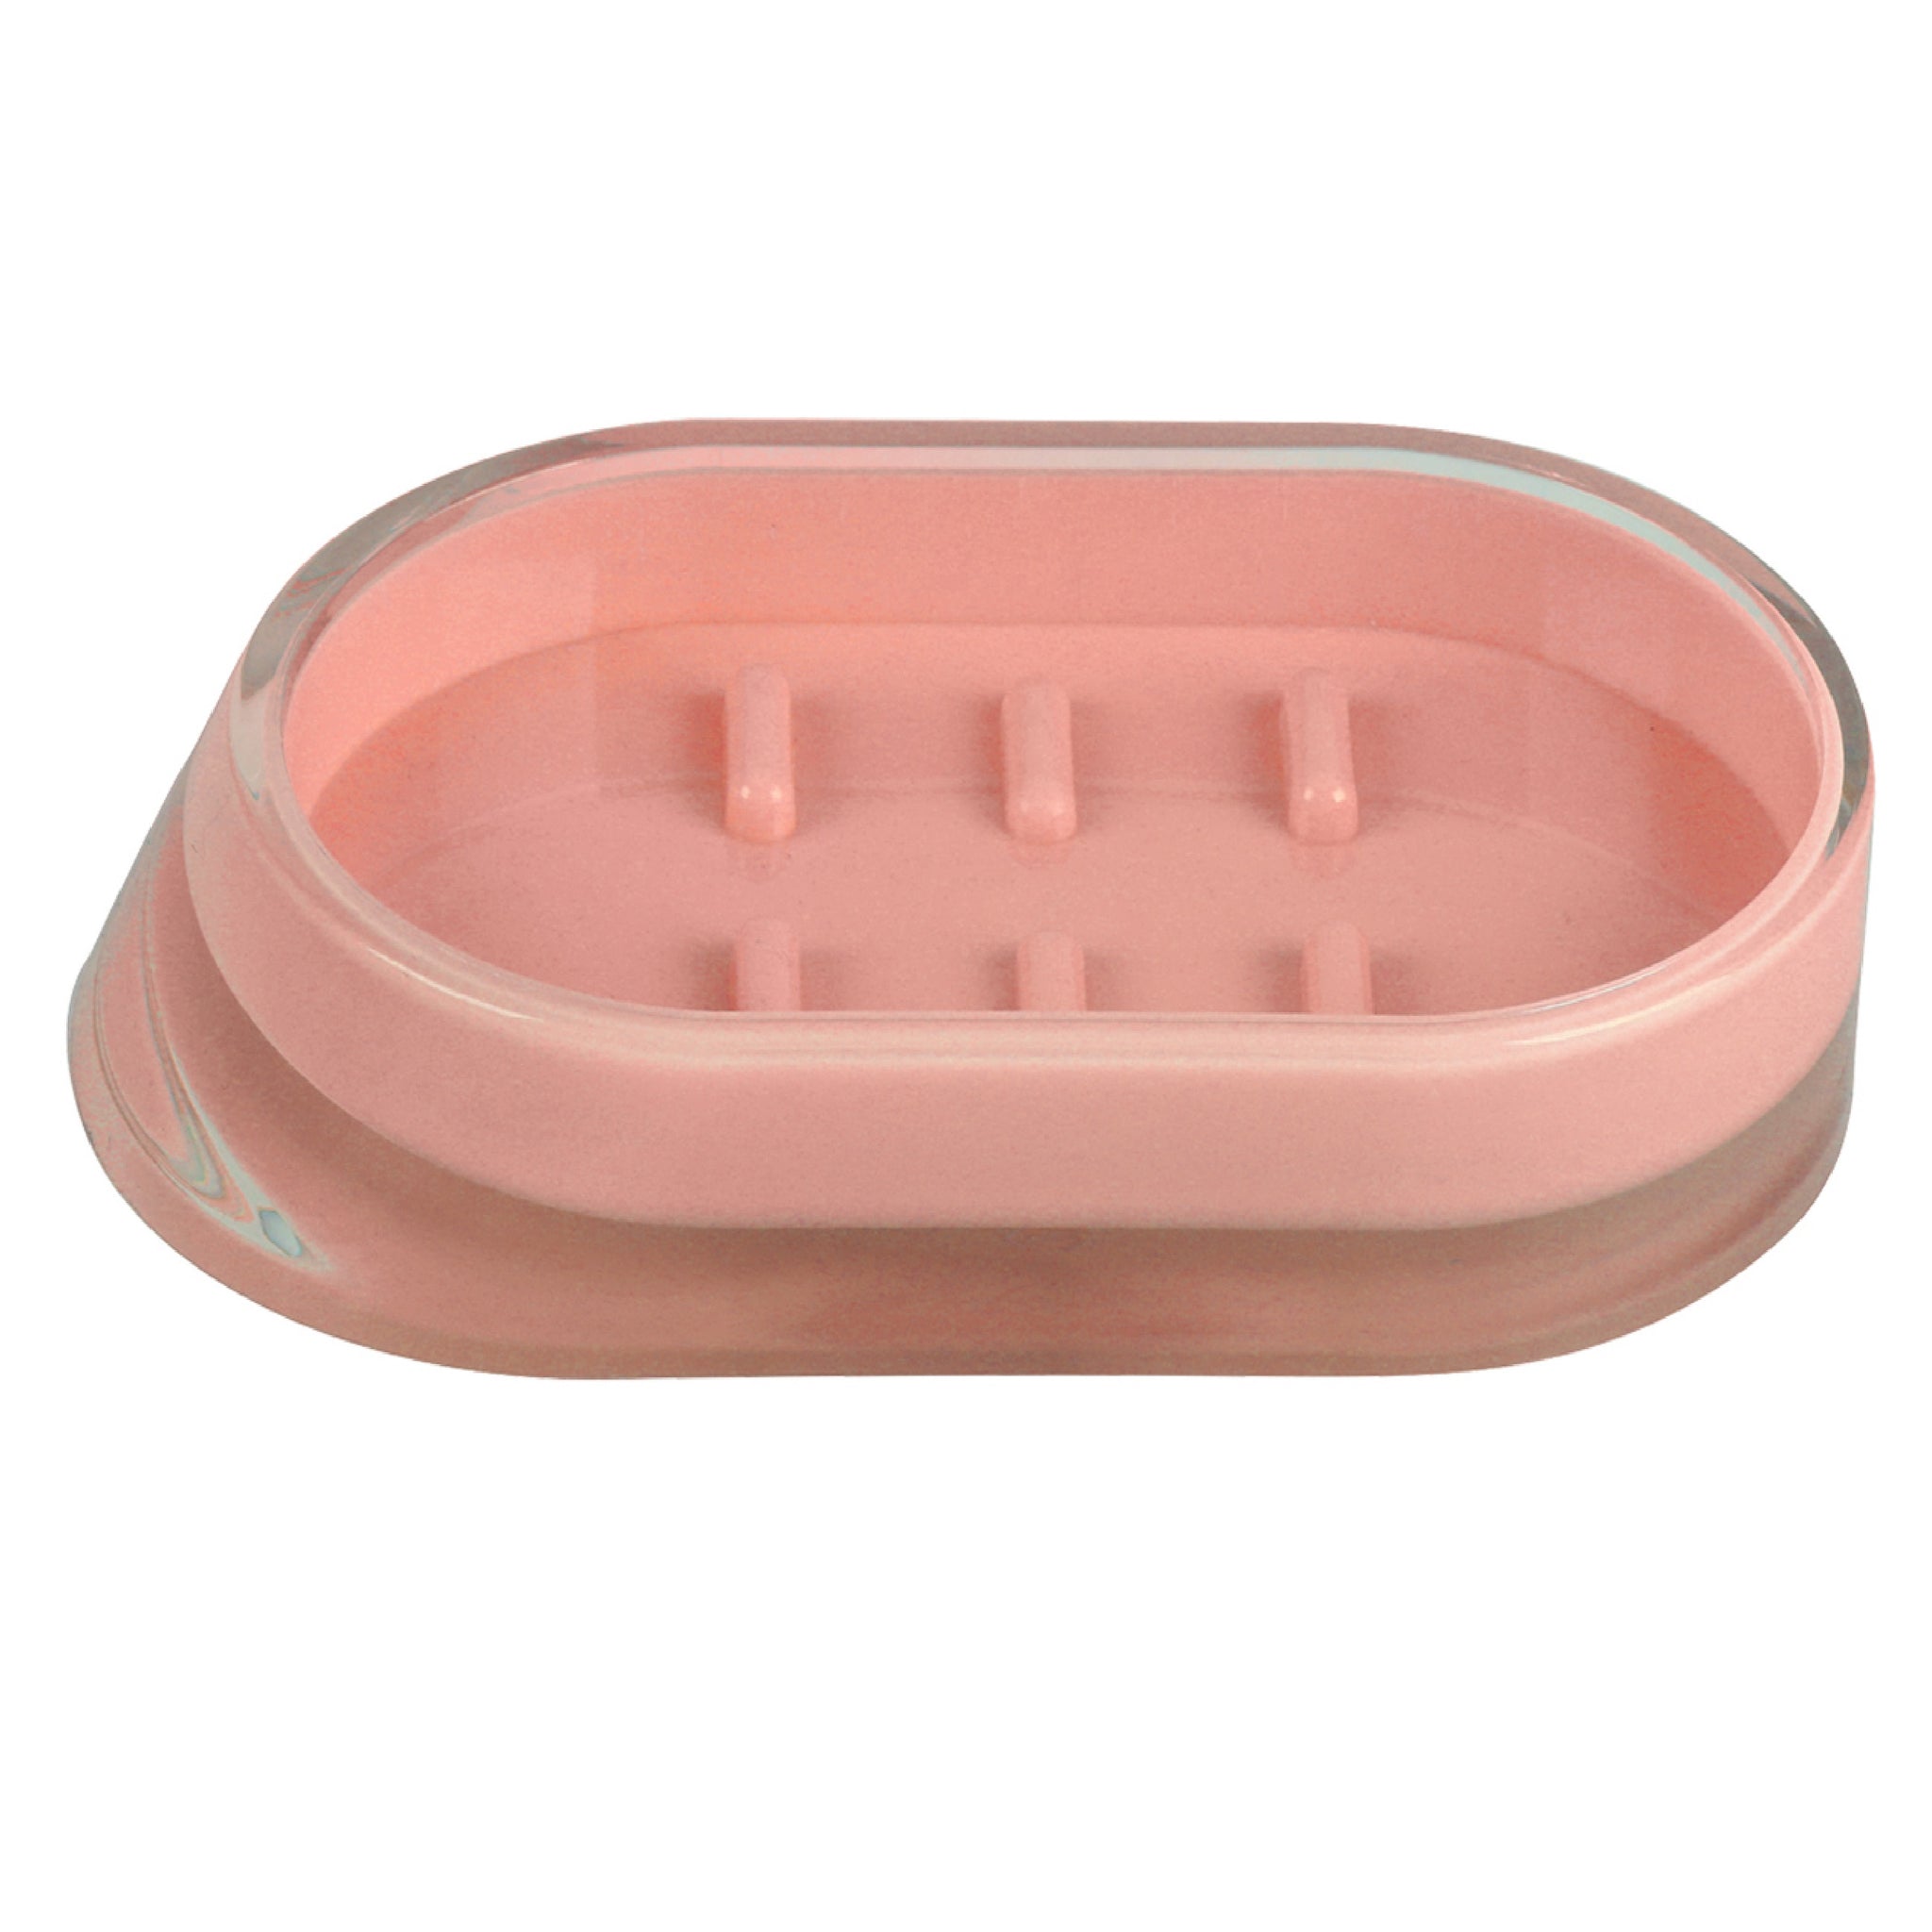 Soap Dishes - Pink & Coral